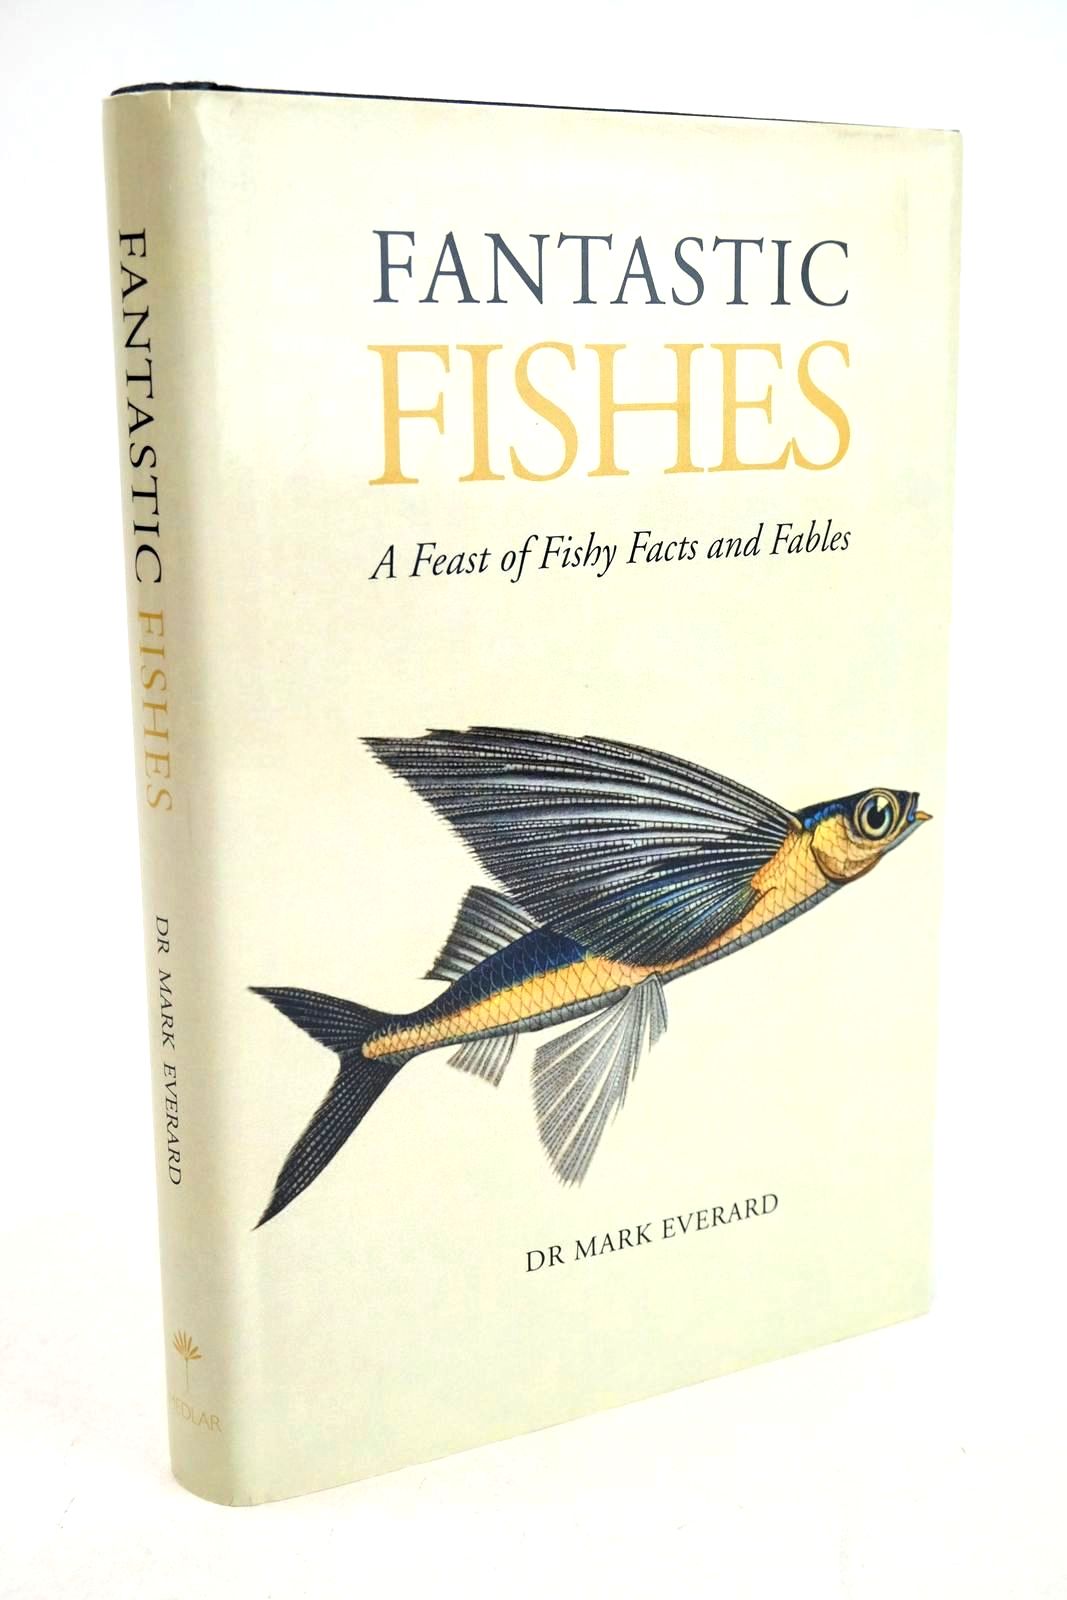 Photo of FANTASTIC FISHES: A FEAST OF FISHY FACTS AND FABLES written by Everard, Mark published by The Medlar Press (STOCK CODE: 1327394)  for sale by Stella & Rose's Books